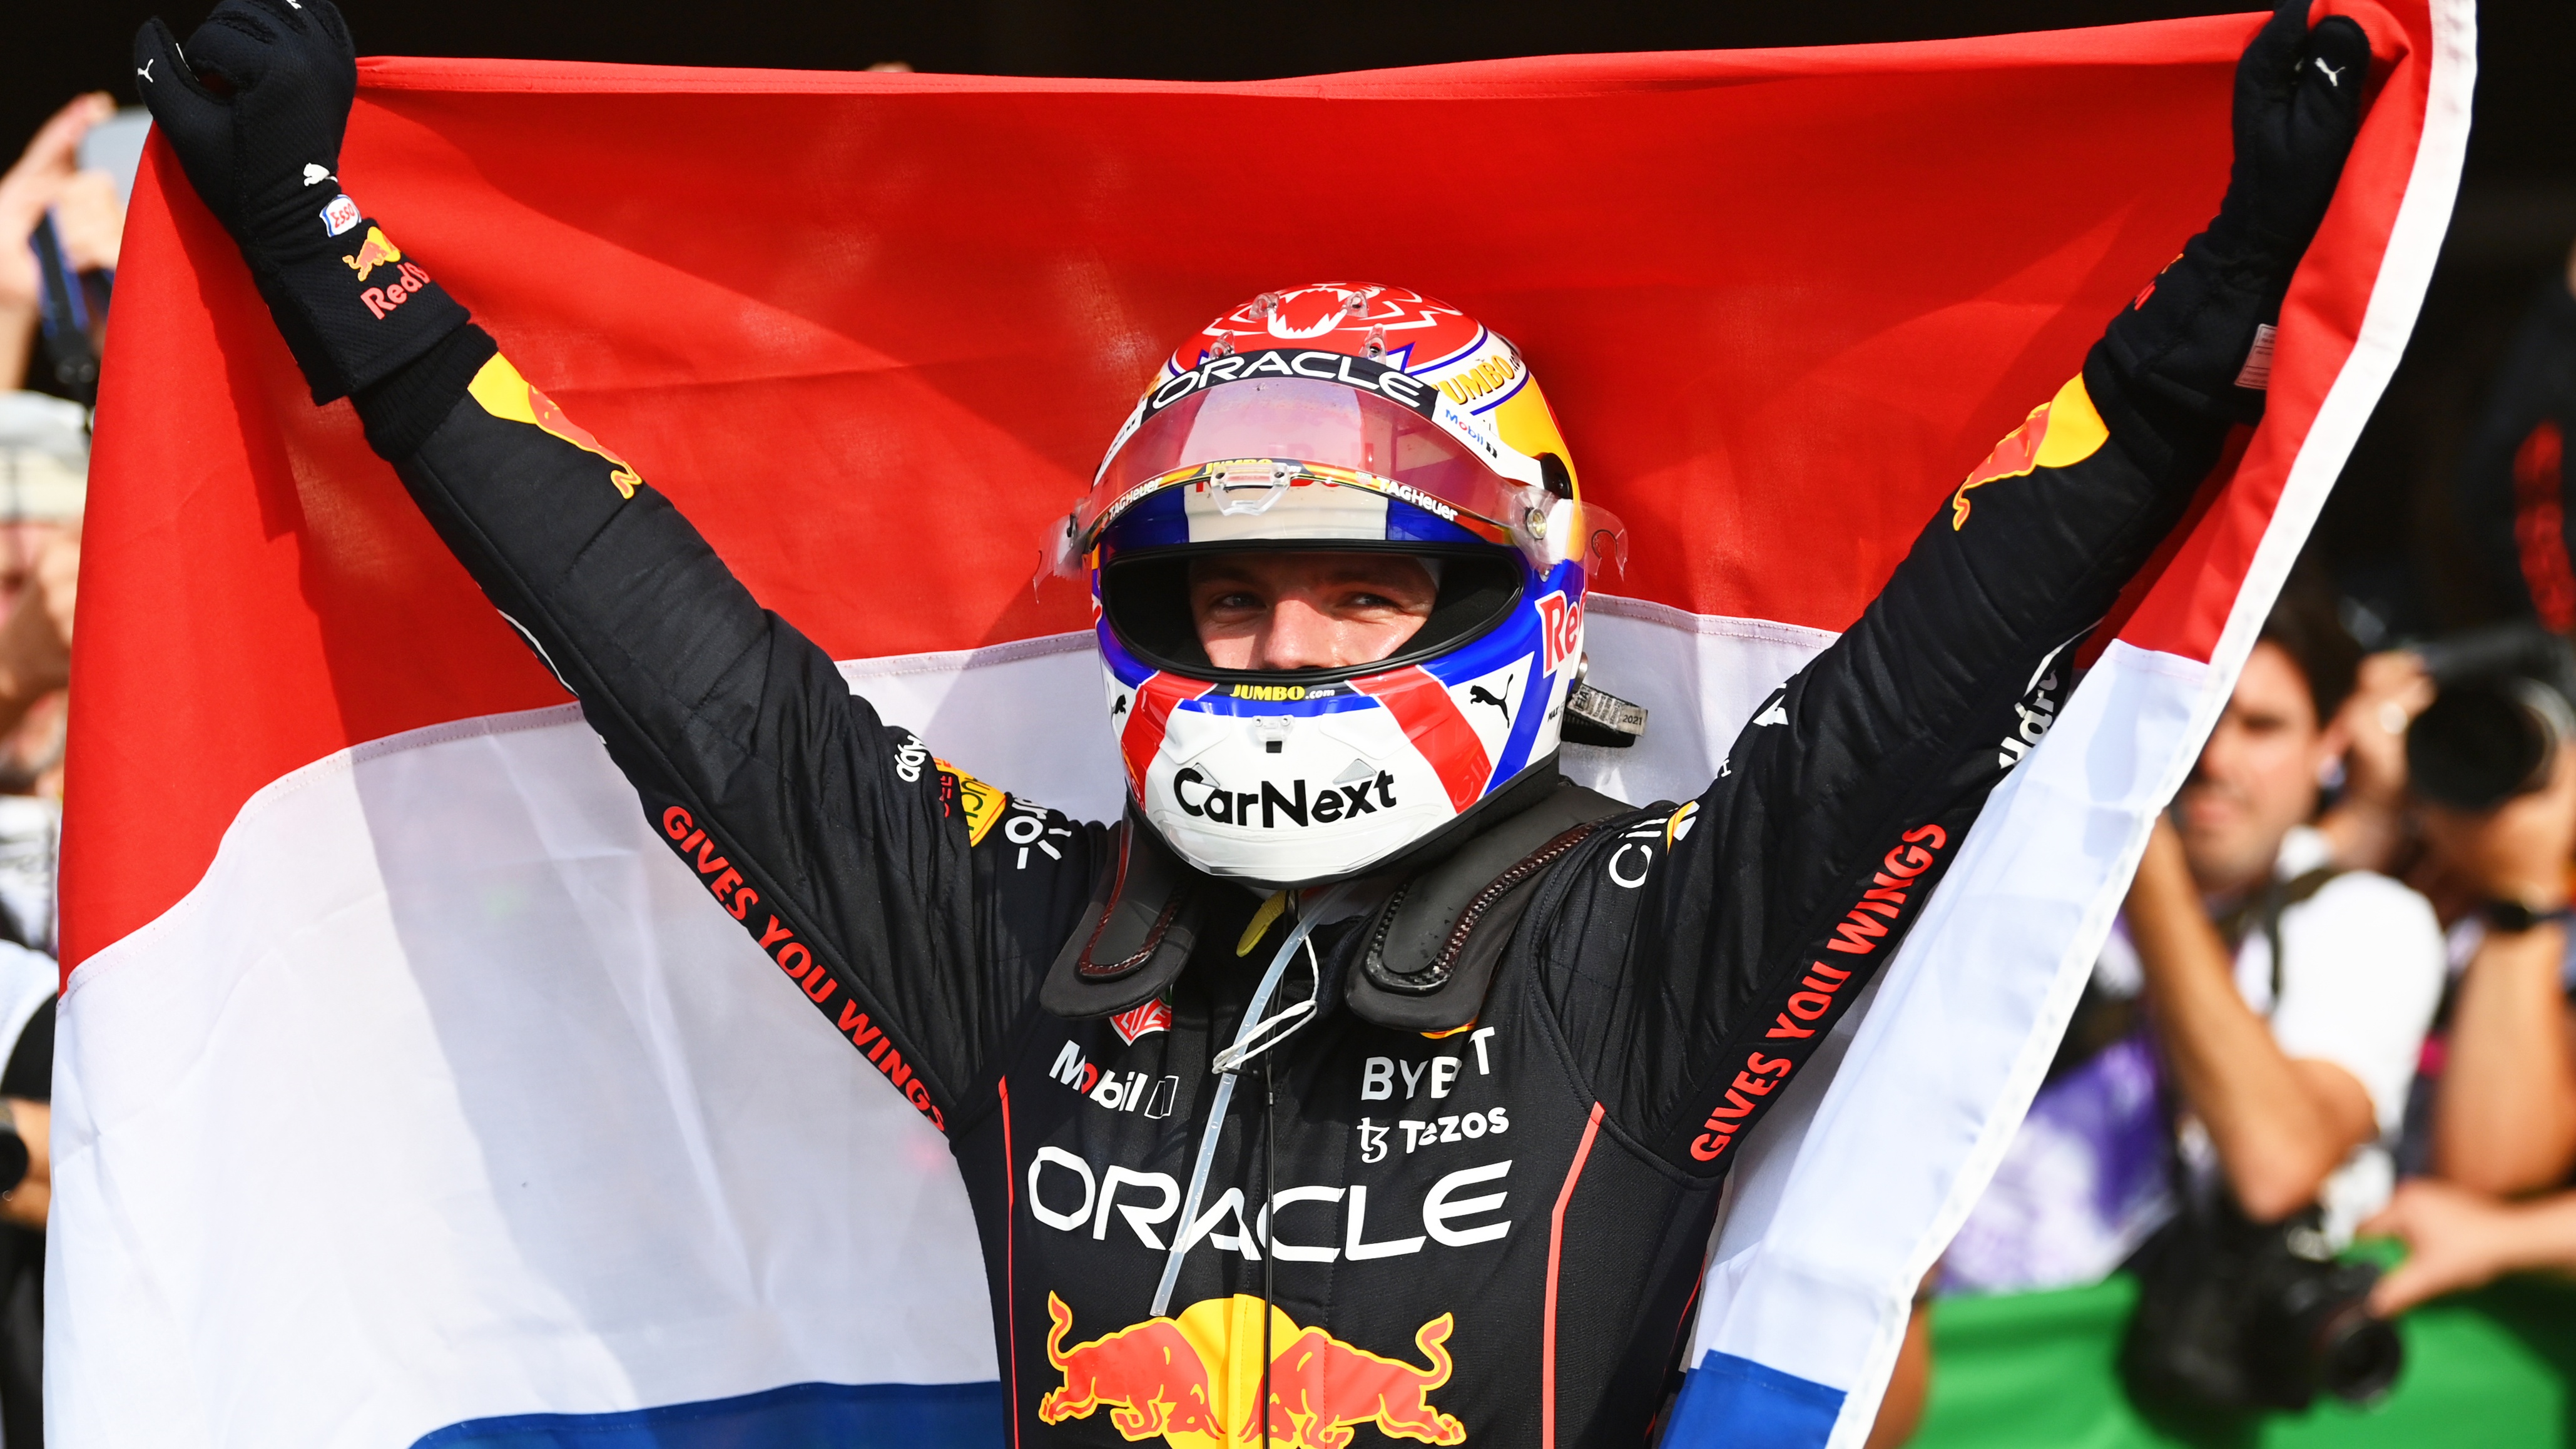 Dutch Grand Prix live stream how to watch the F1 free online from anywhere 